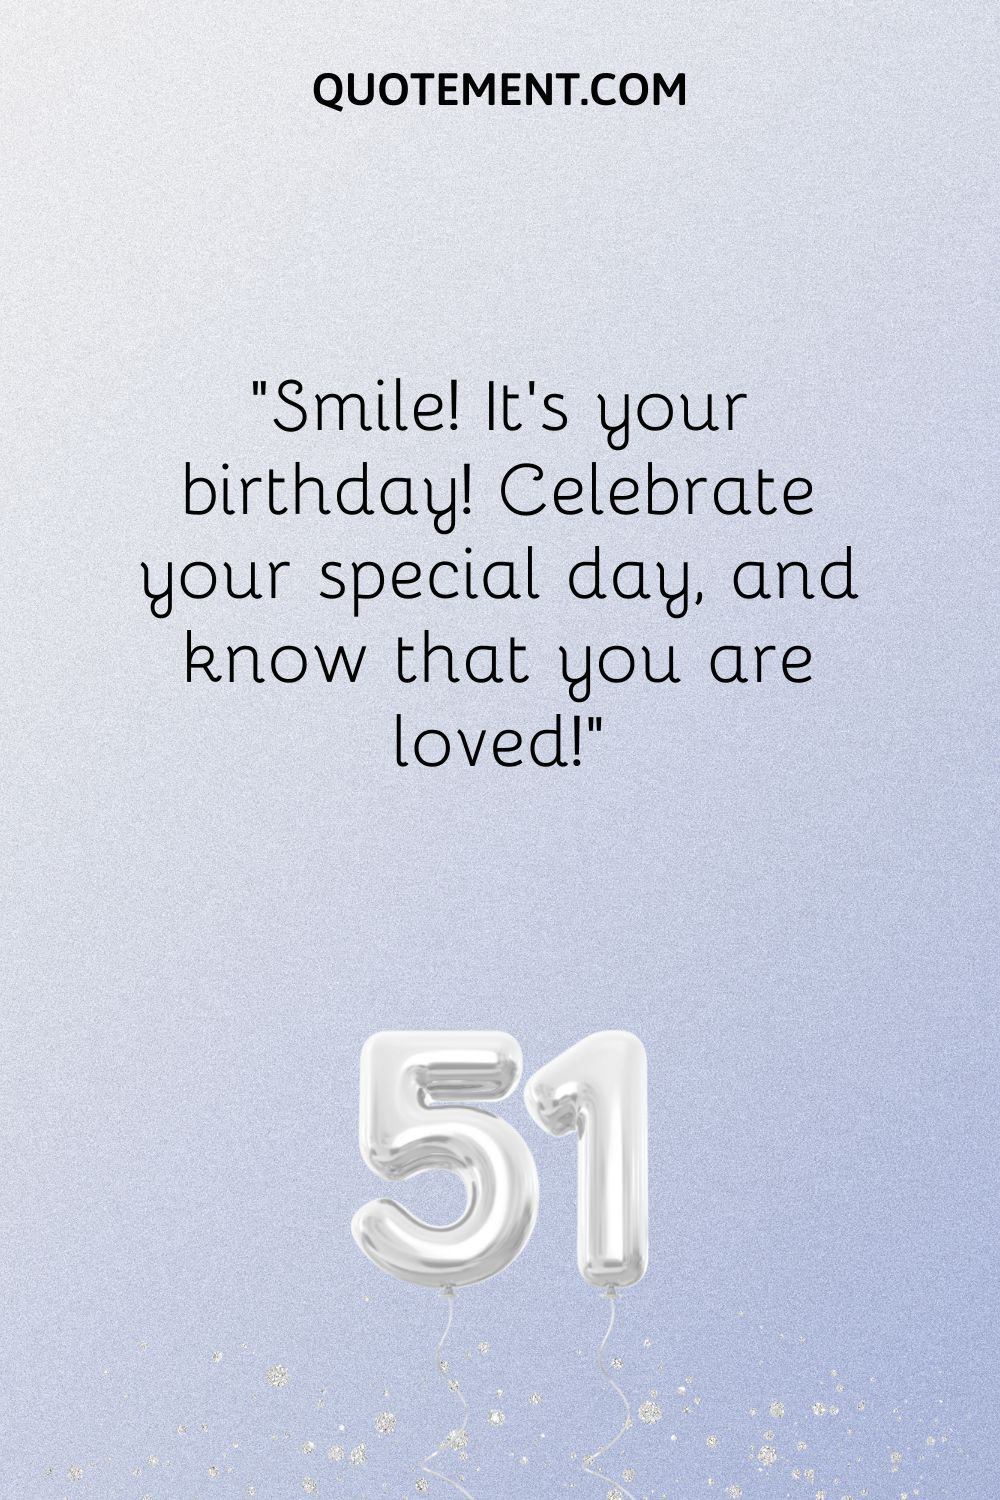 Celebrate your special day, and know that you are loved